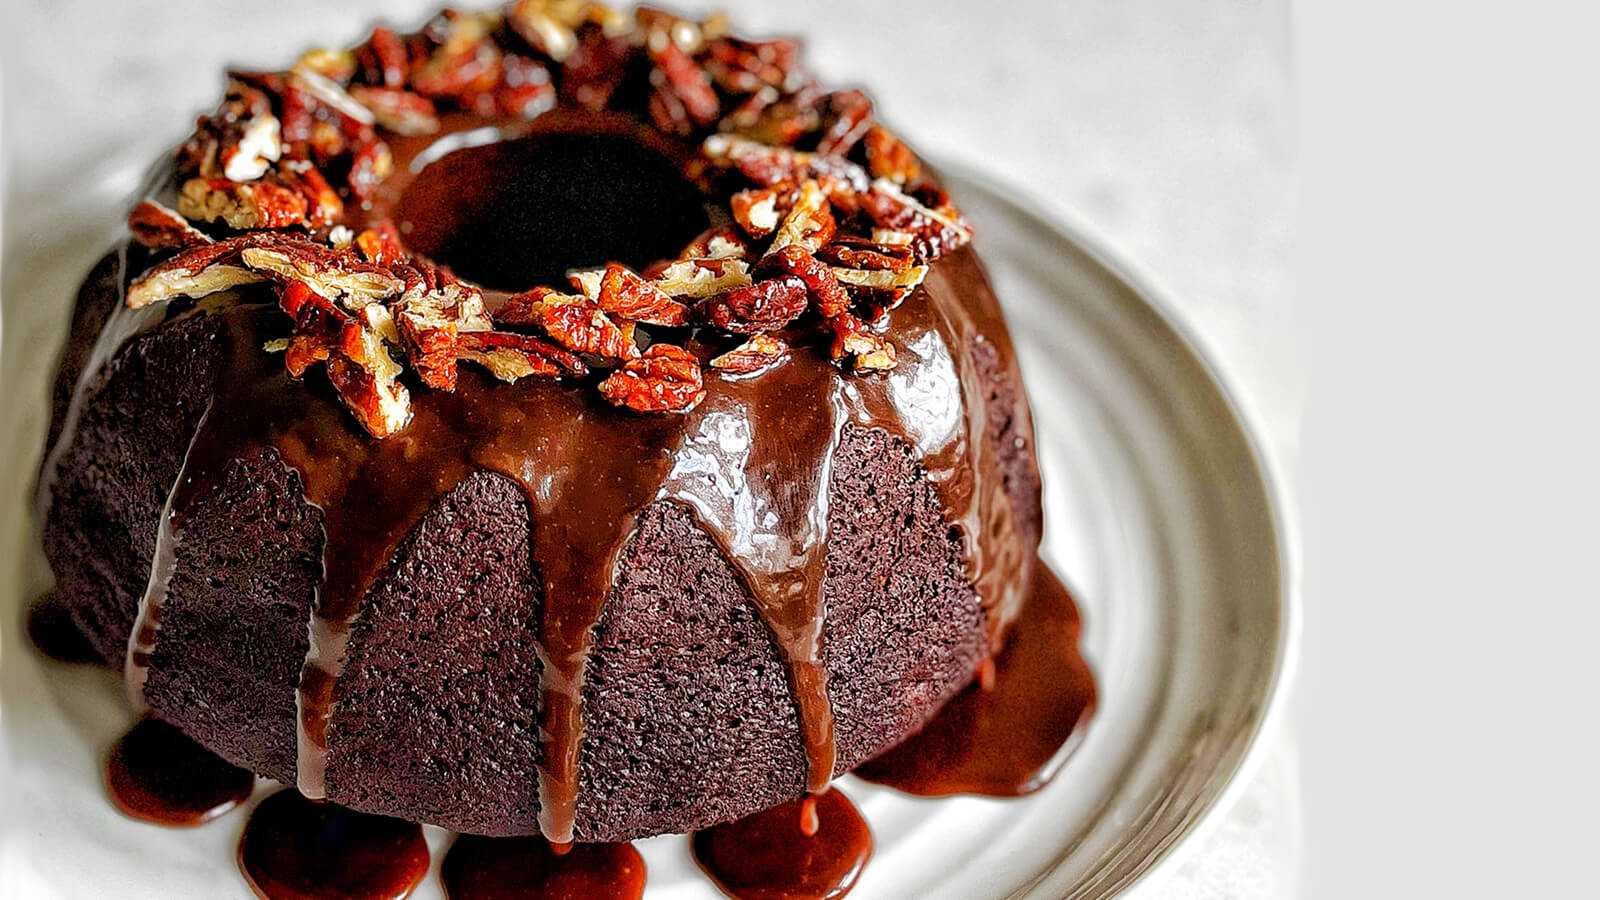 You are currently viewing Will Torrent’s Chocolate Banana Bundt Cake with Salted Caramel Frosting